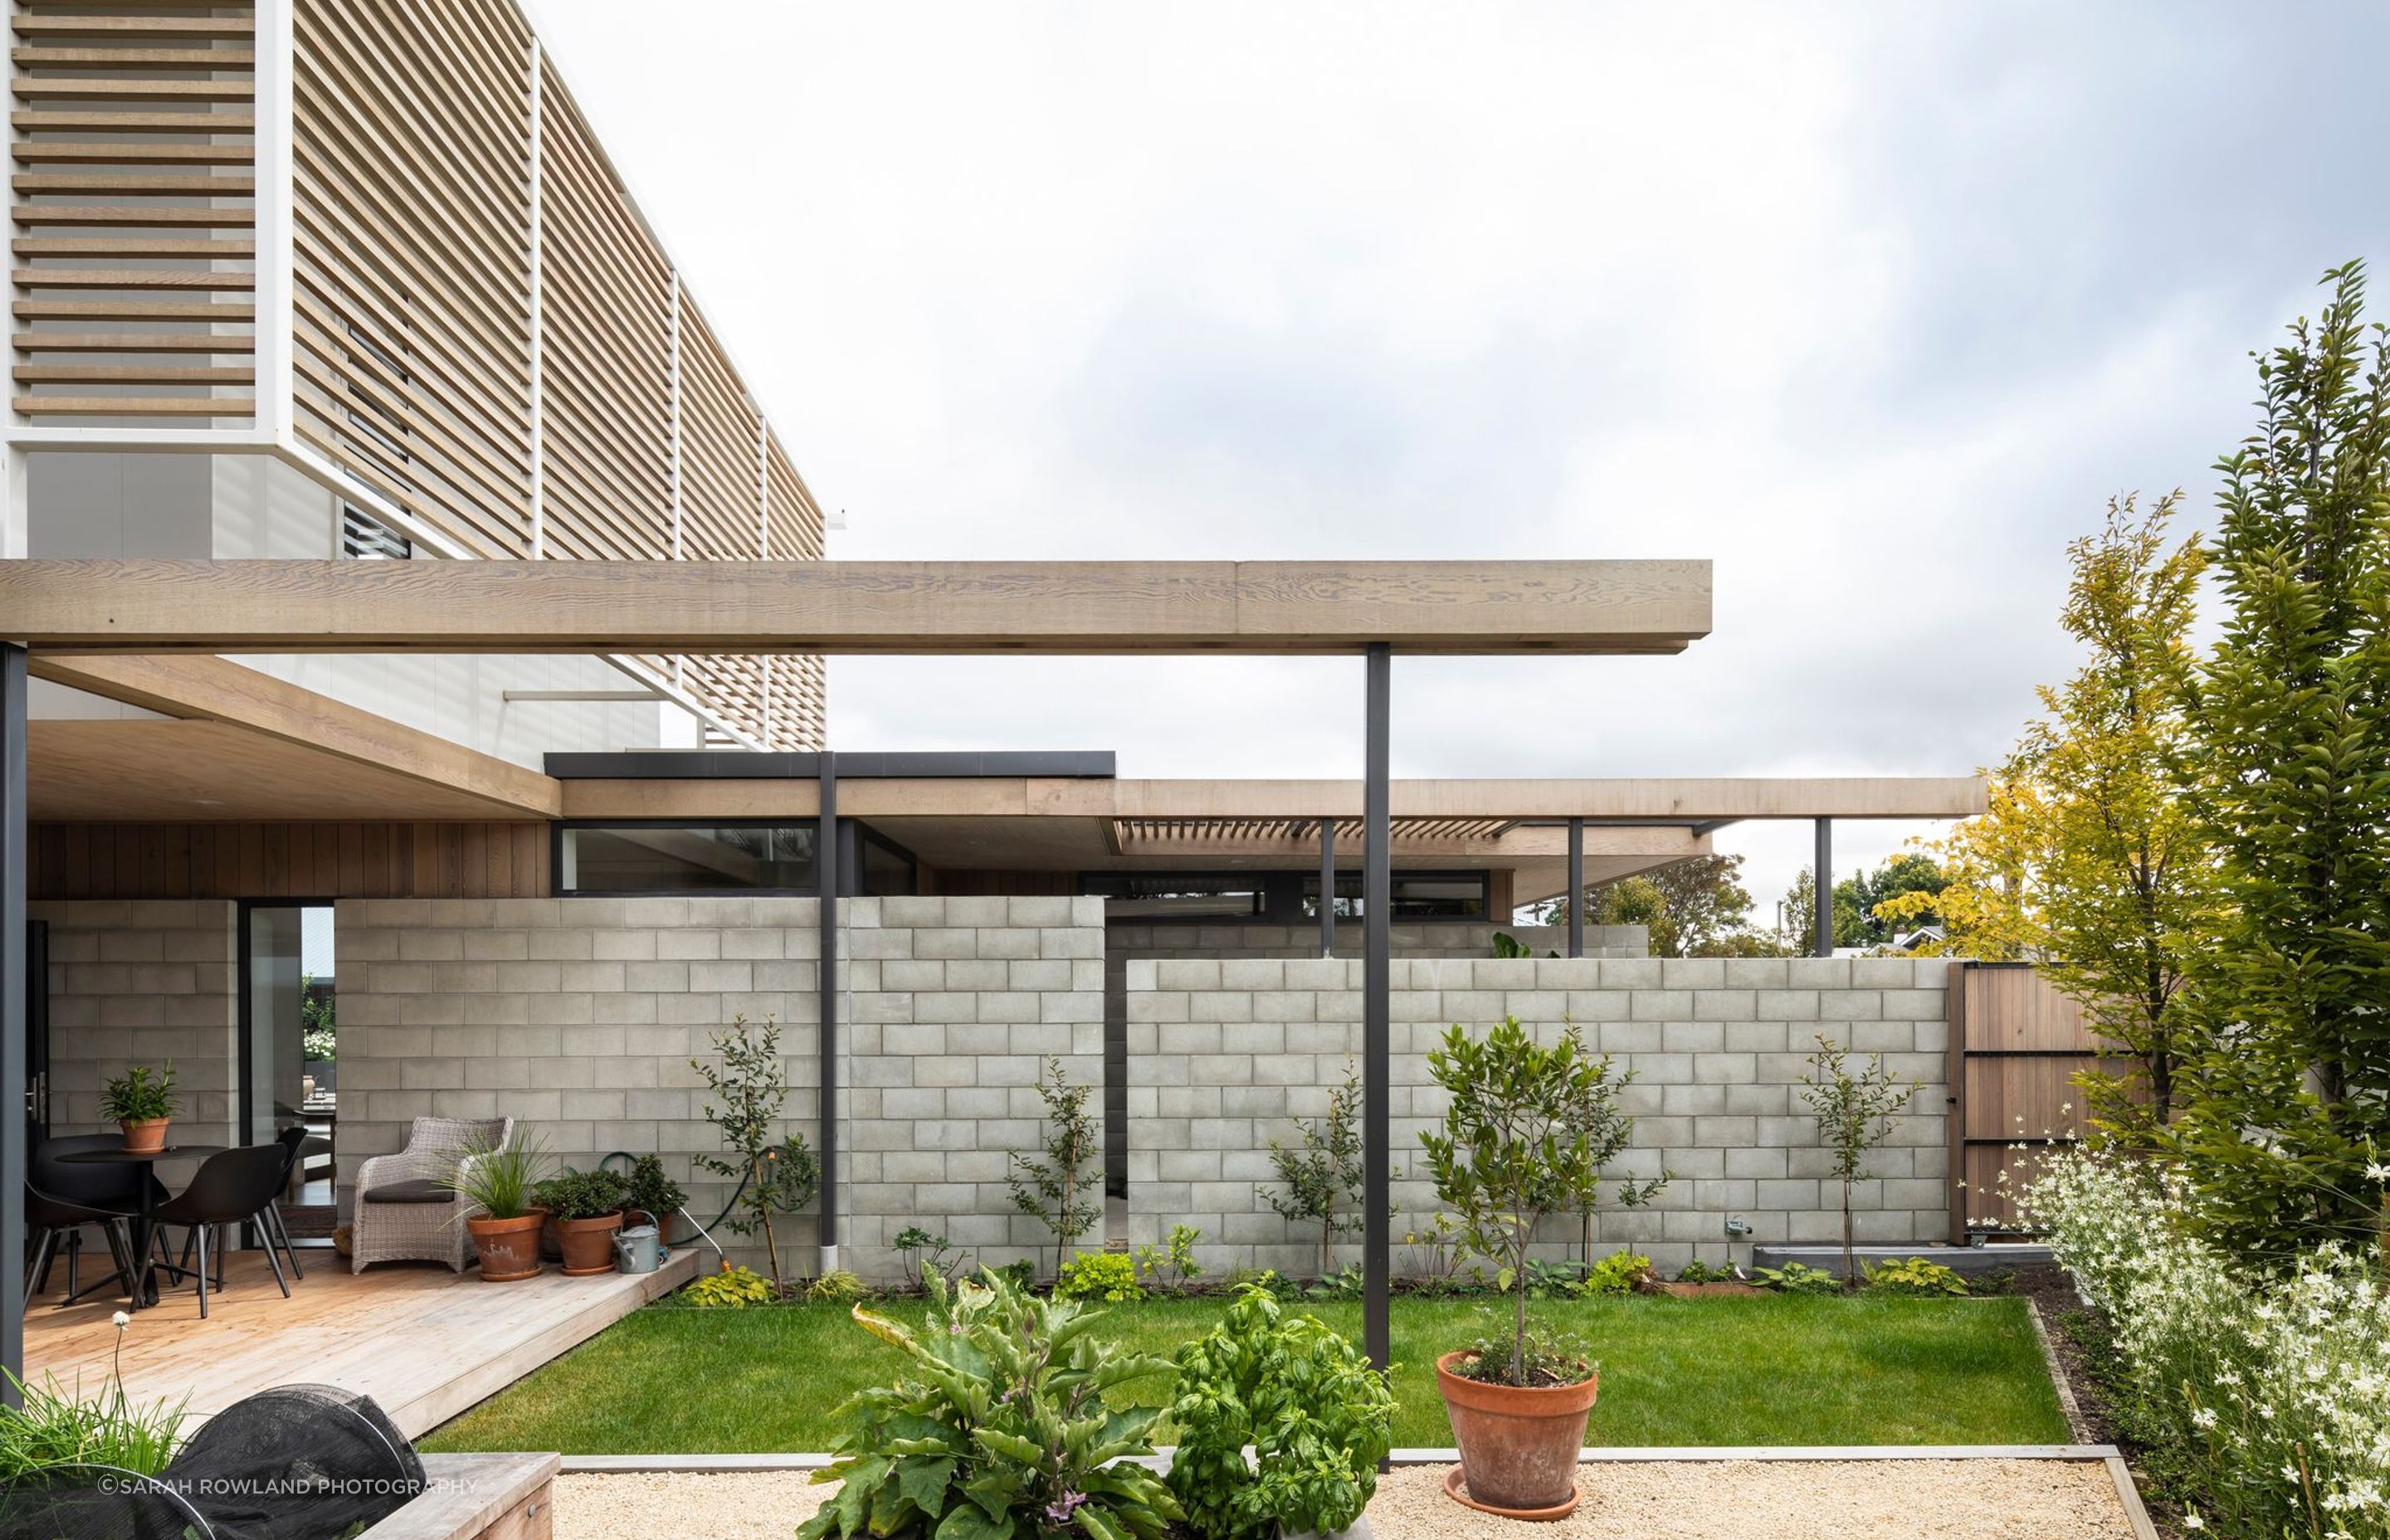 To answer the clients' brief for a comfortable, 'easy to live in' home, a simple palette of natural, low-maintenance materials—cedar, concrete block and fibre cement boards—was specified.